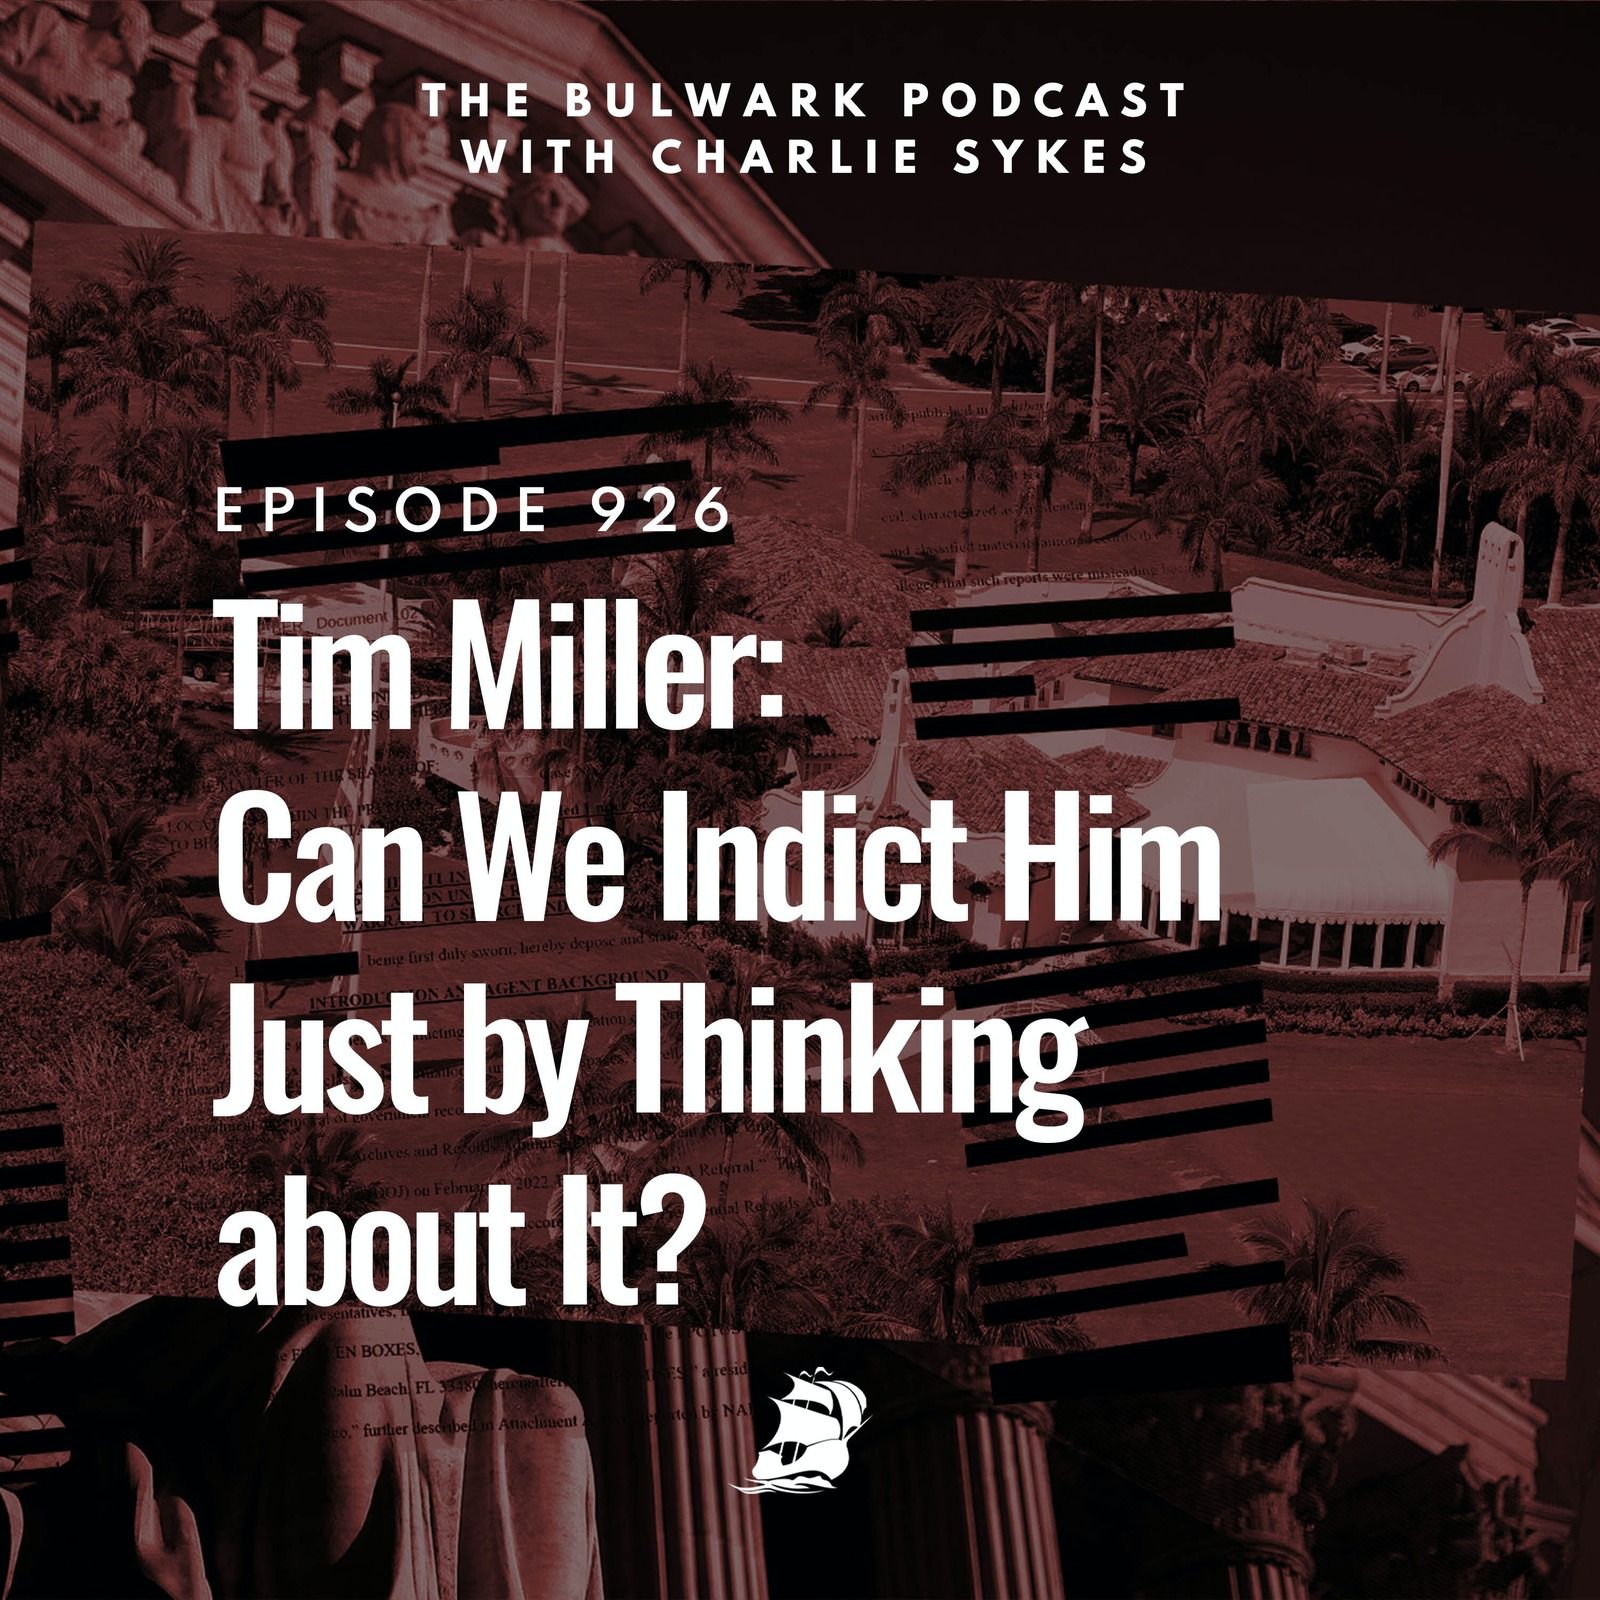 Tim Miller: Can We Indict Him Just by Thinking about It?